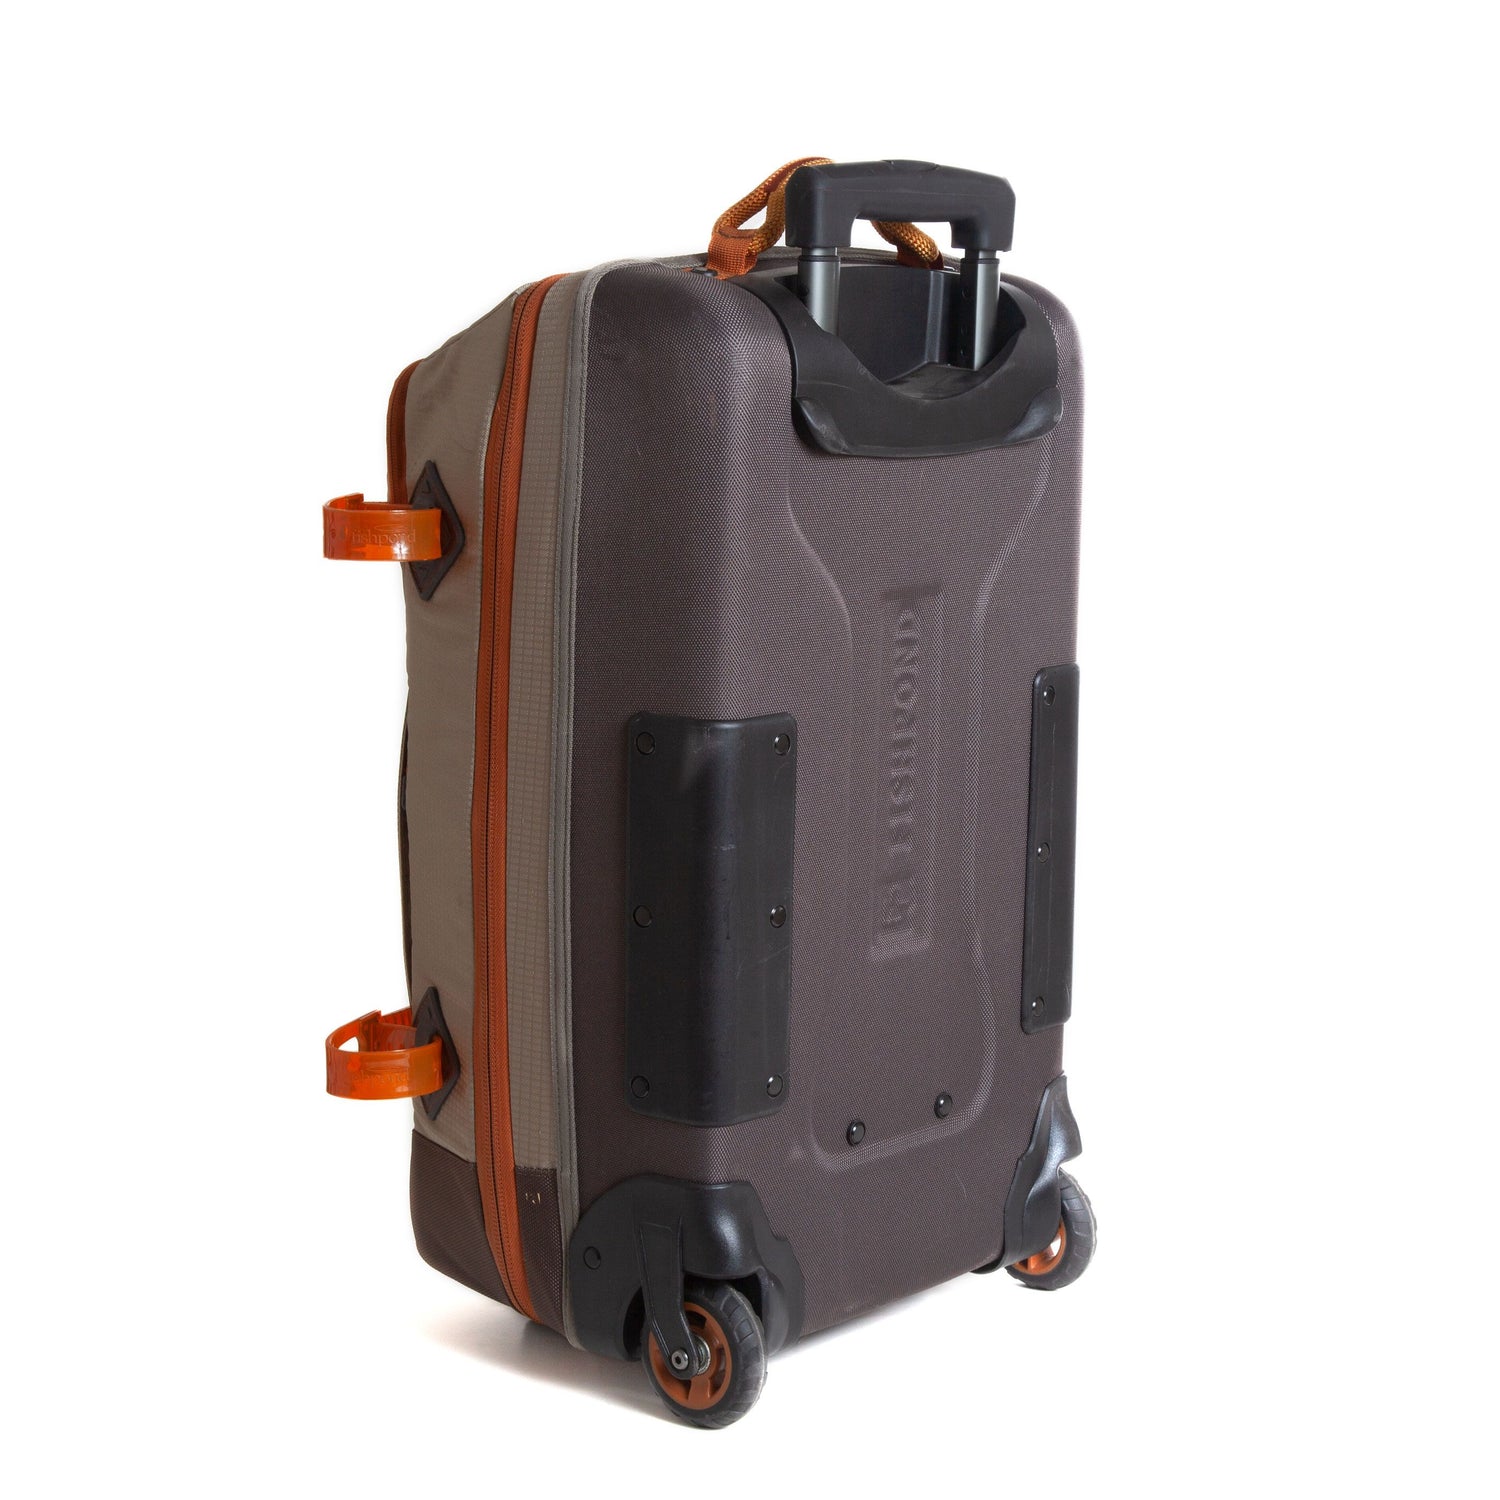 Rolling Carry-On Luggage Bag